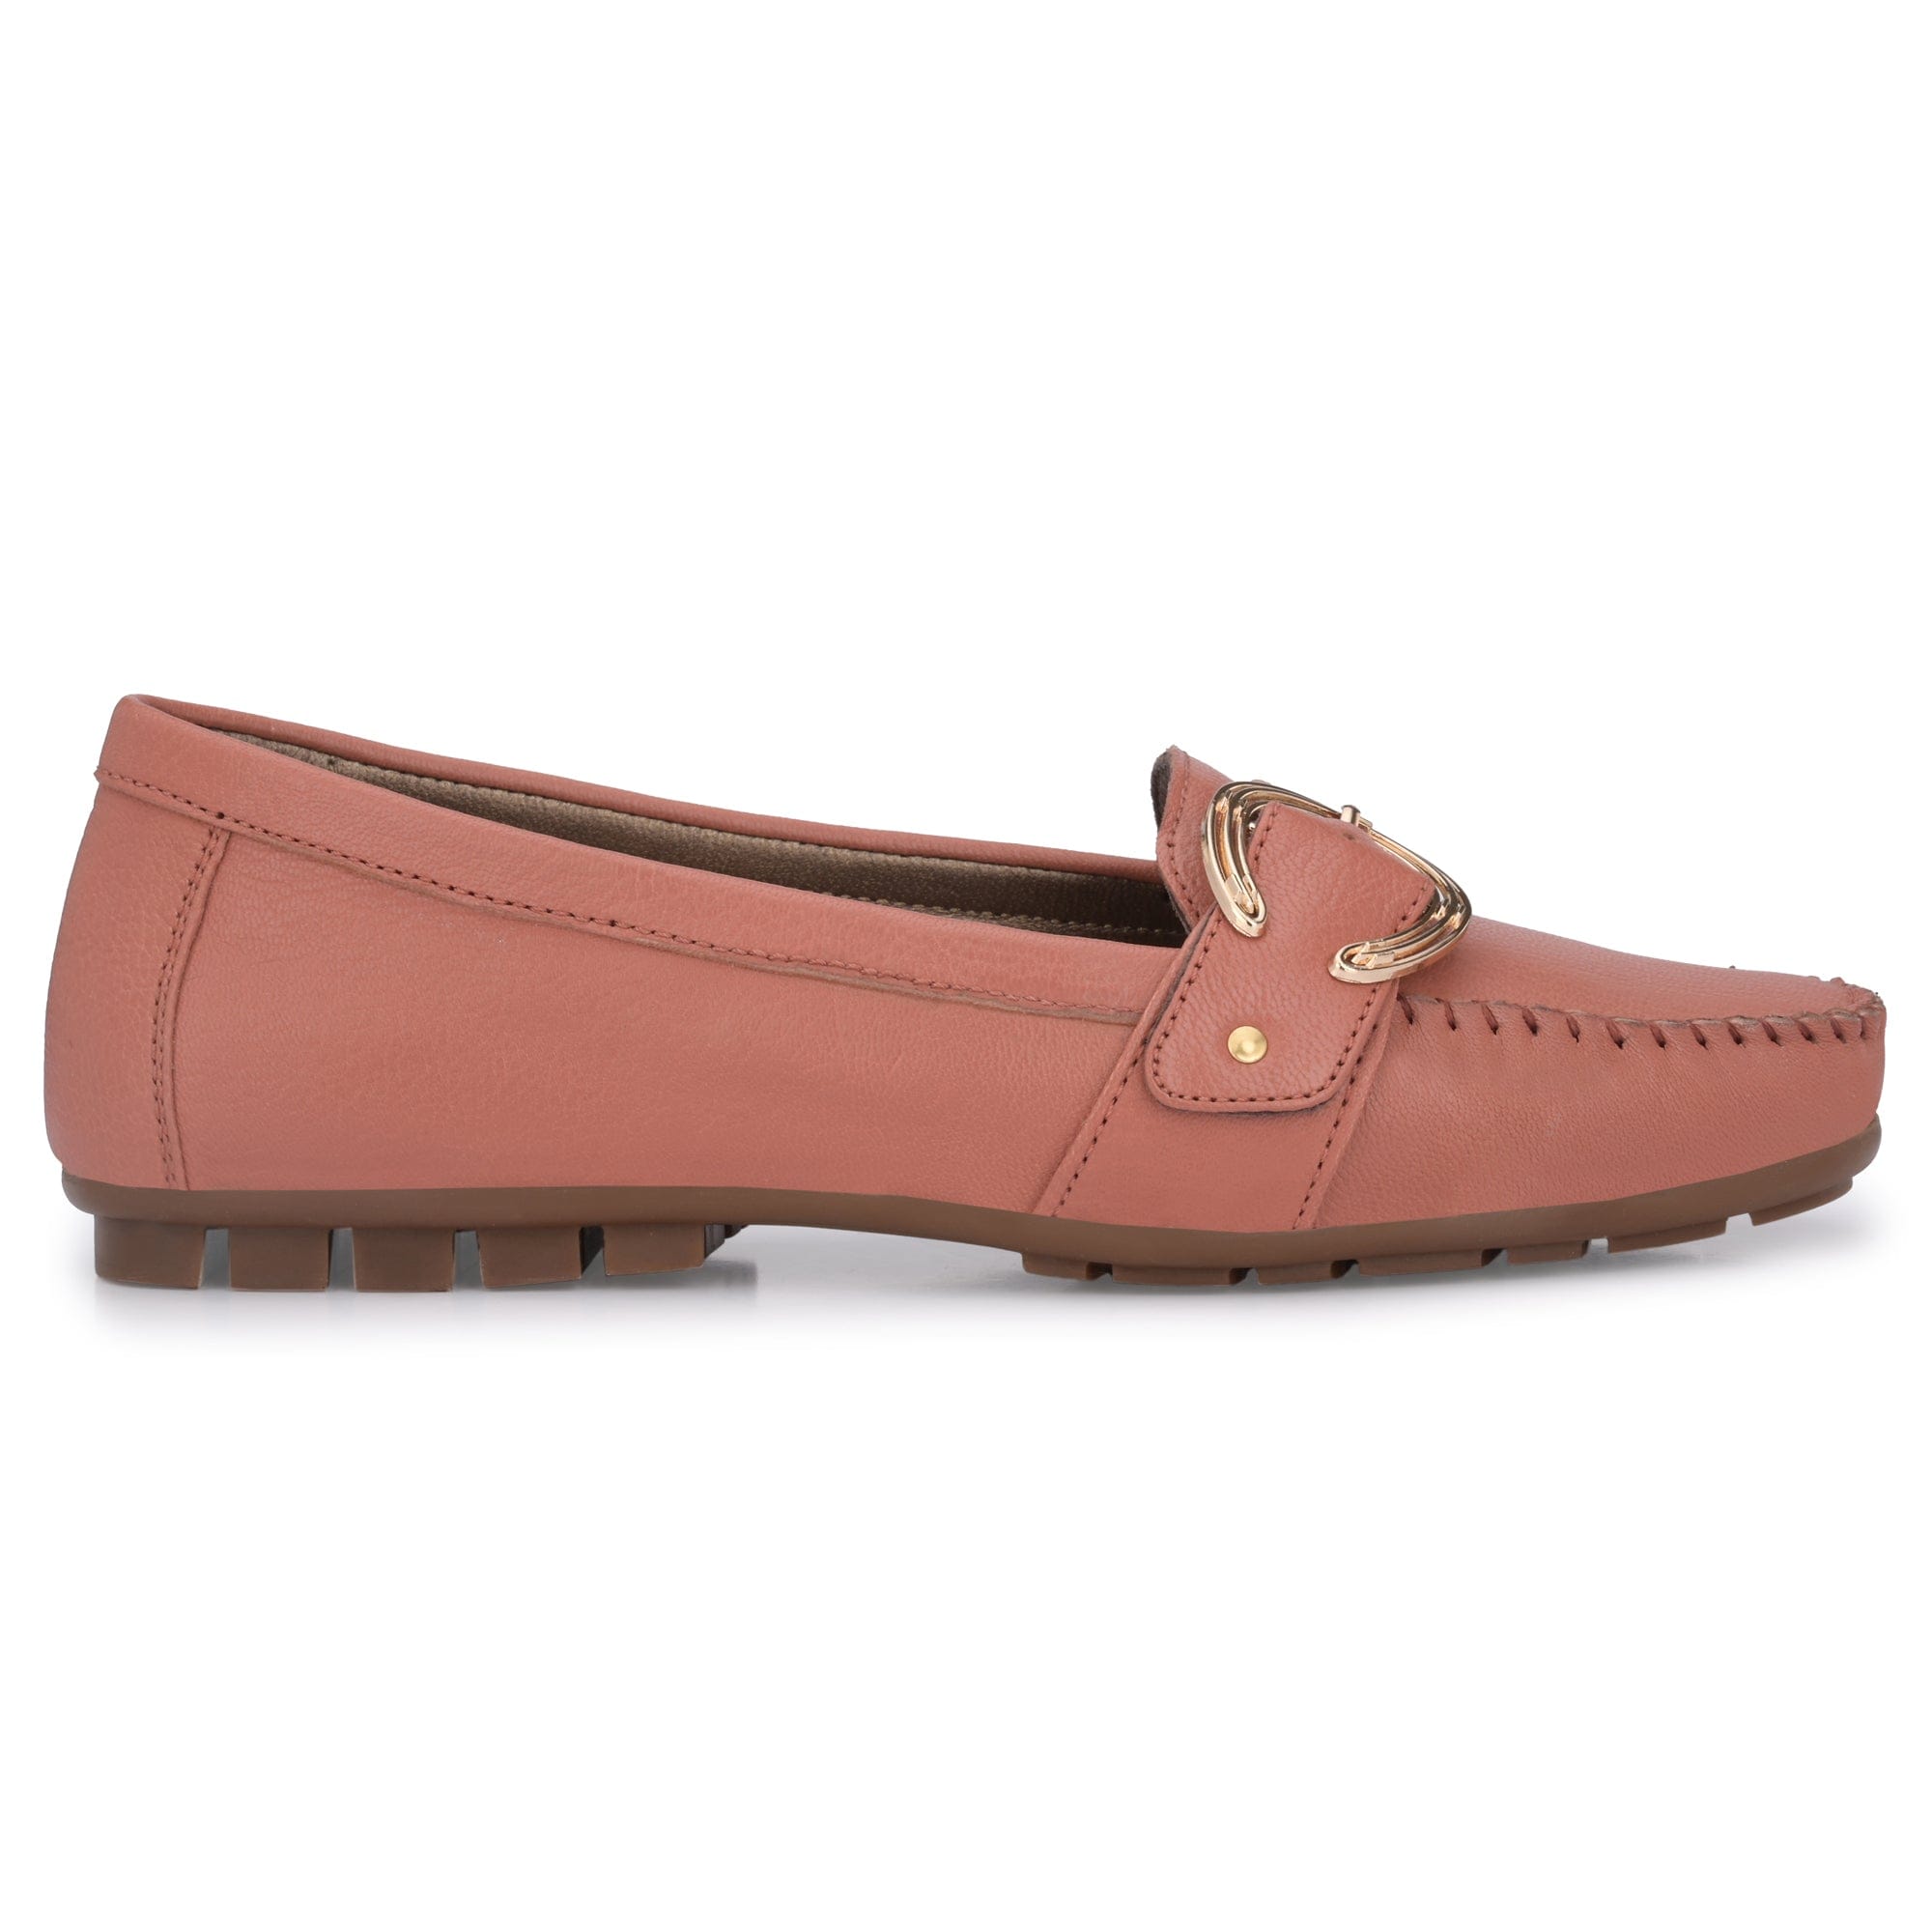 Buckled Casual Loafers For Women by Lady Boss egoss-shoes